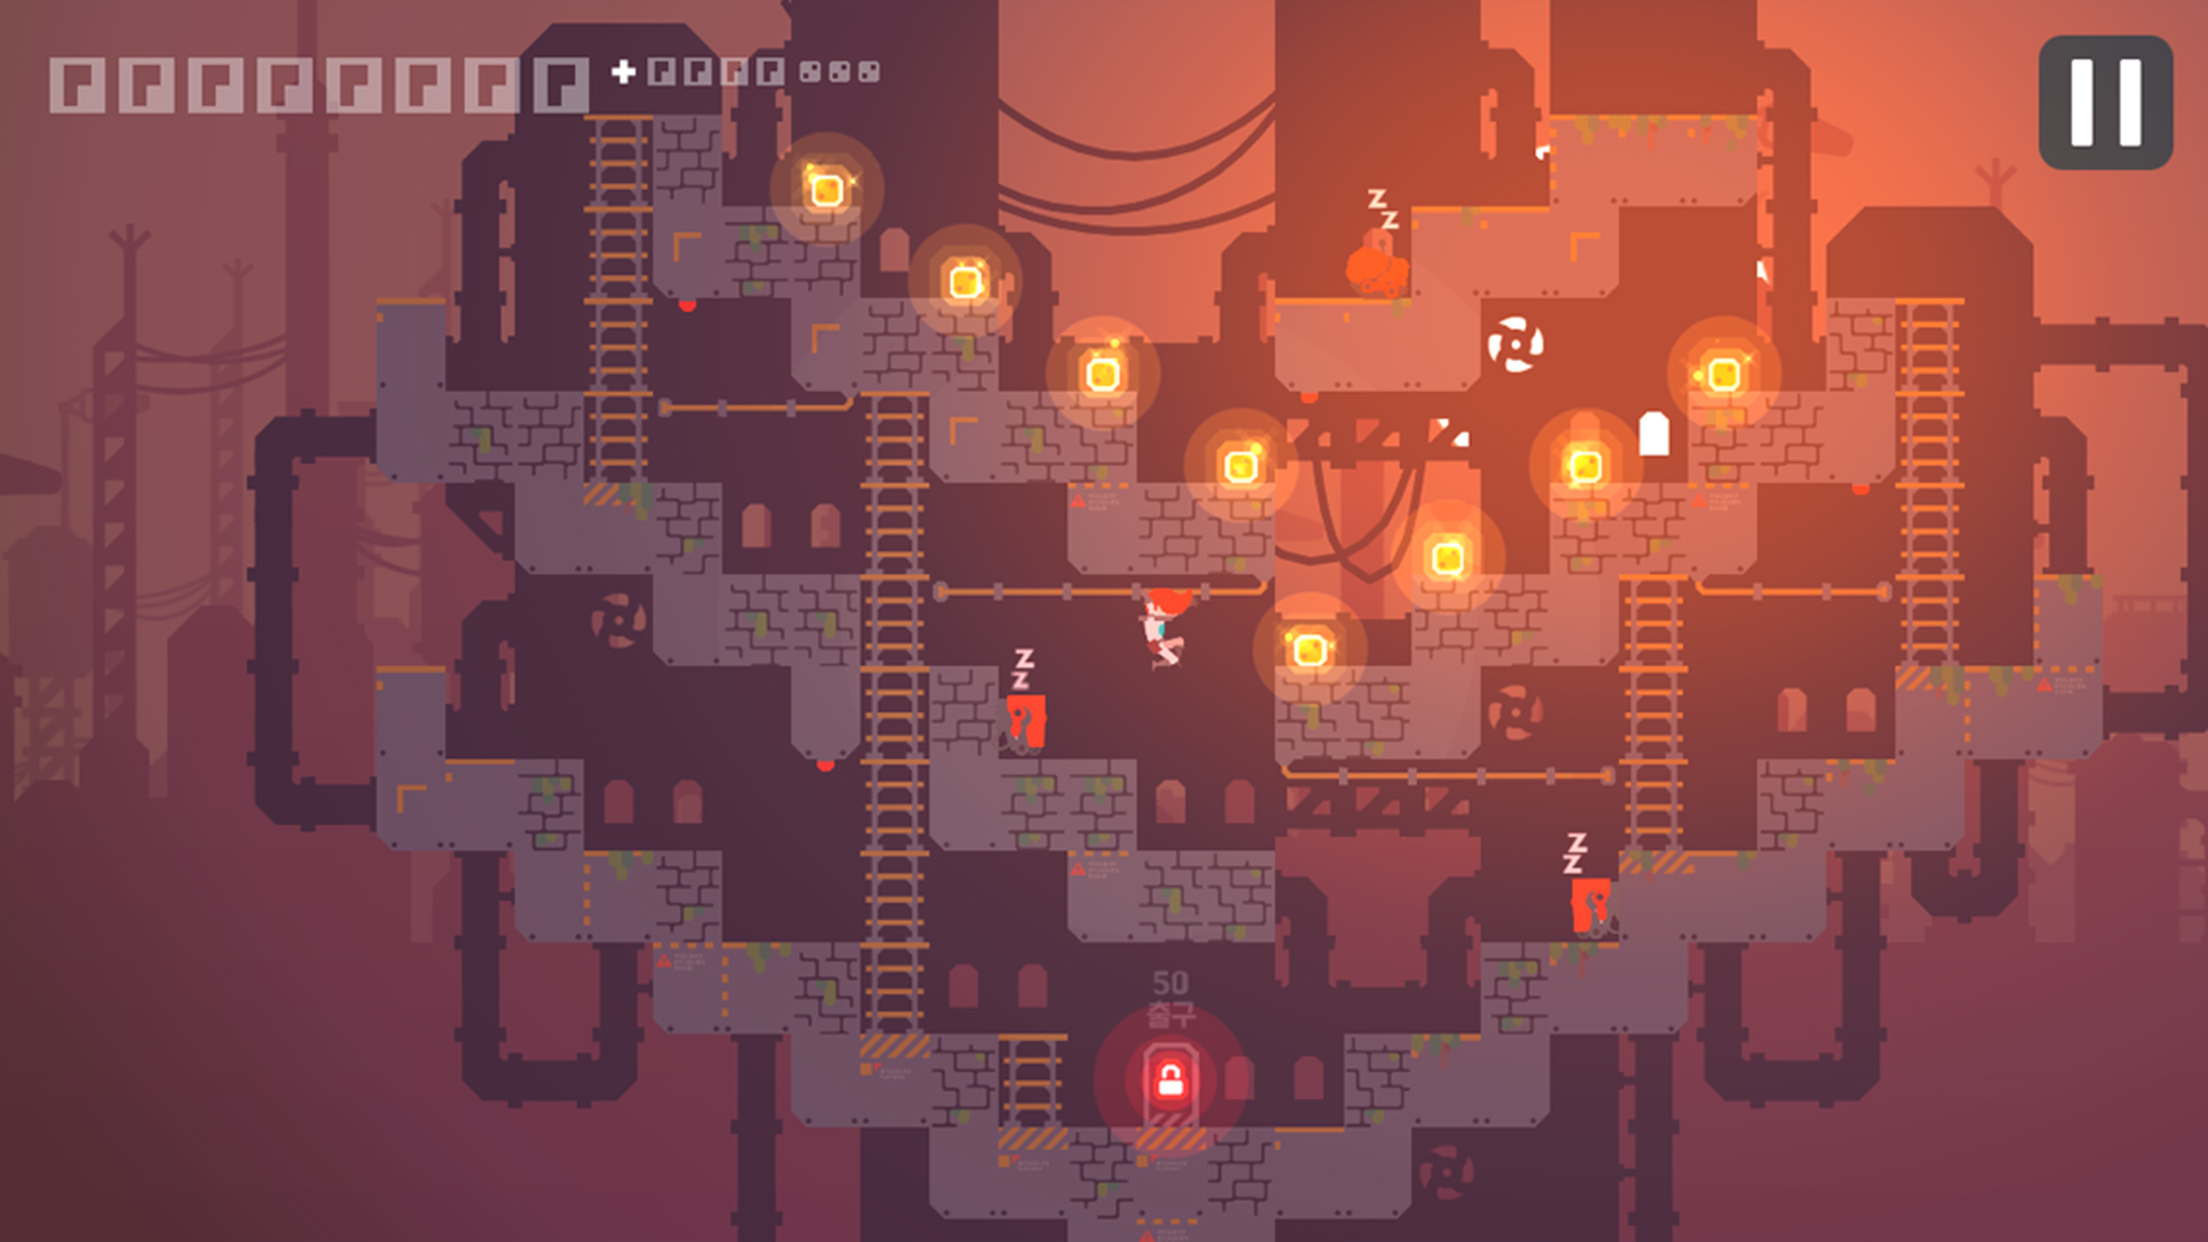 'Lode Runner 1' is a Well-Made Adaptation of 'Lode Runner' and...Completely Free"